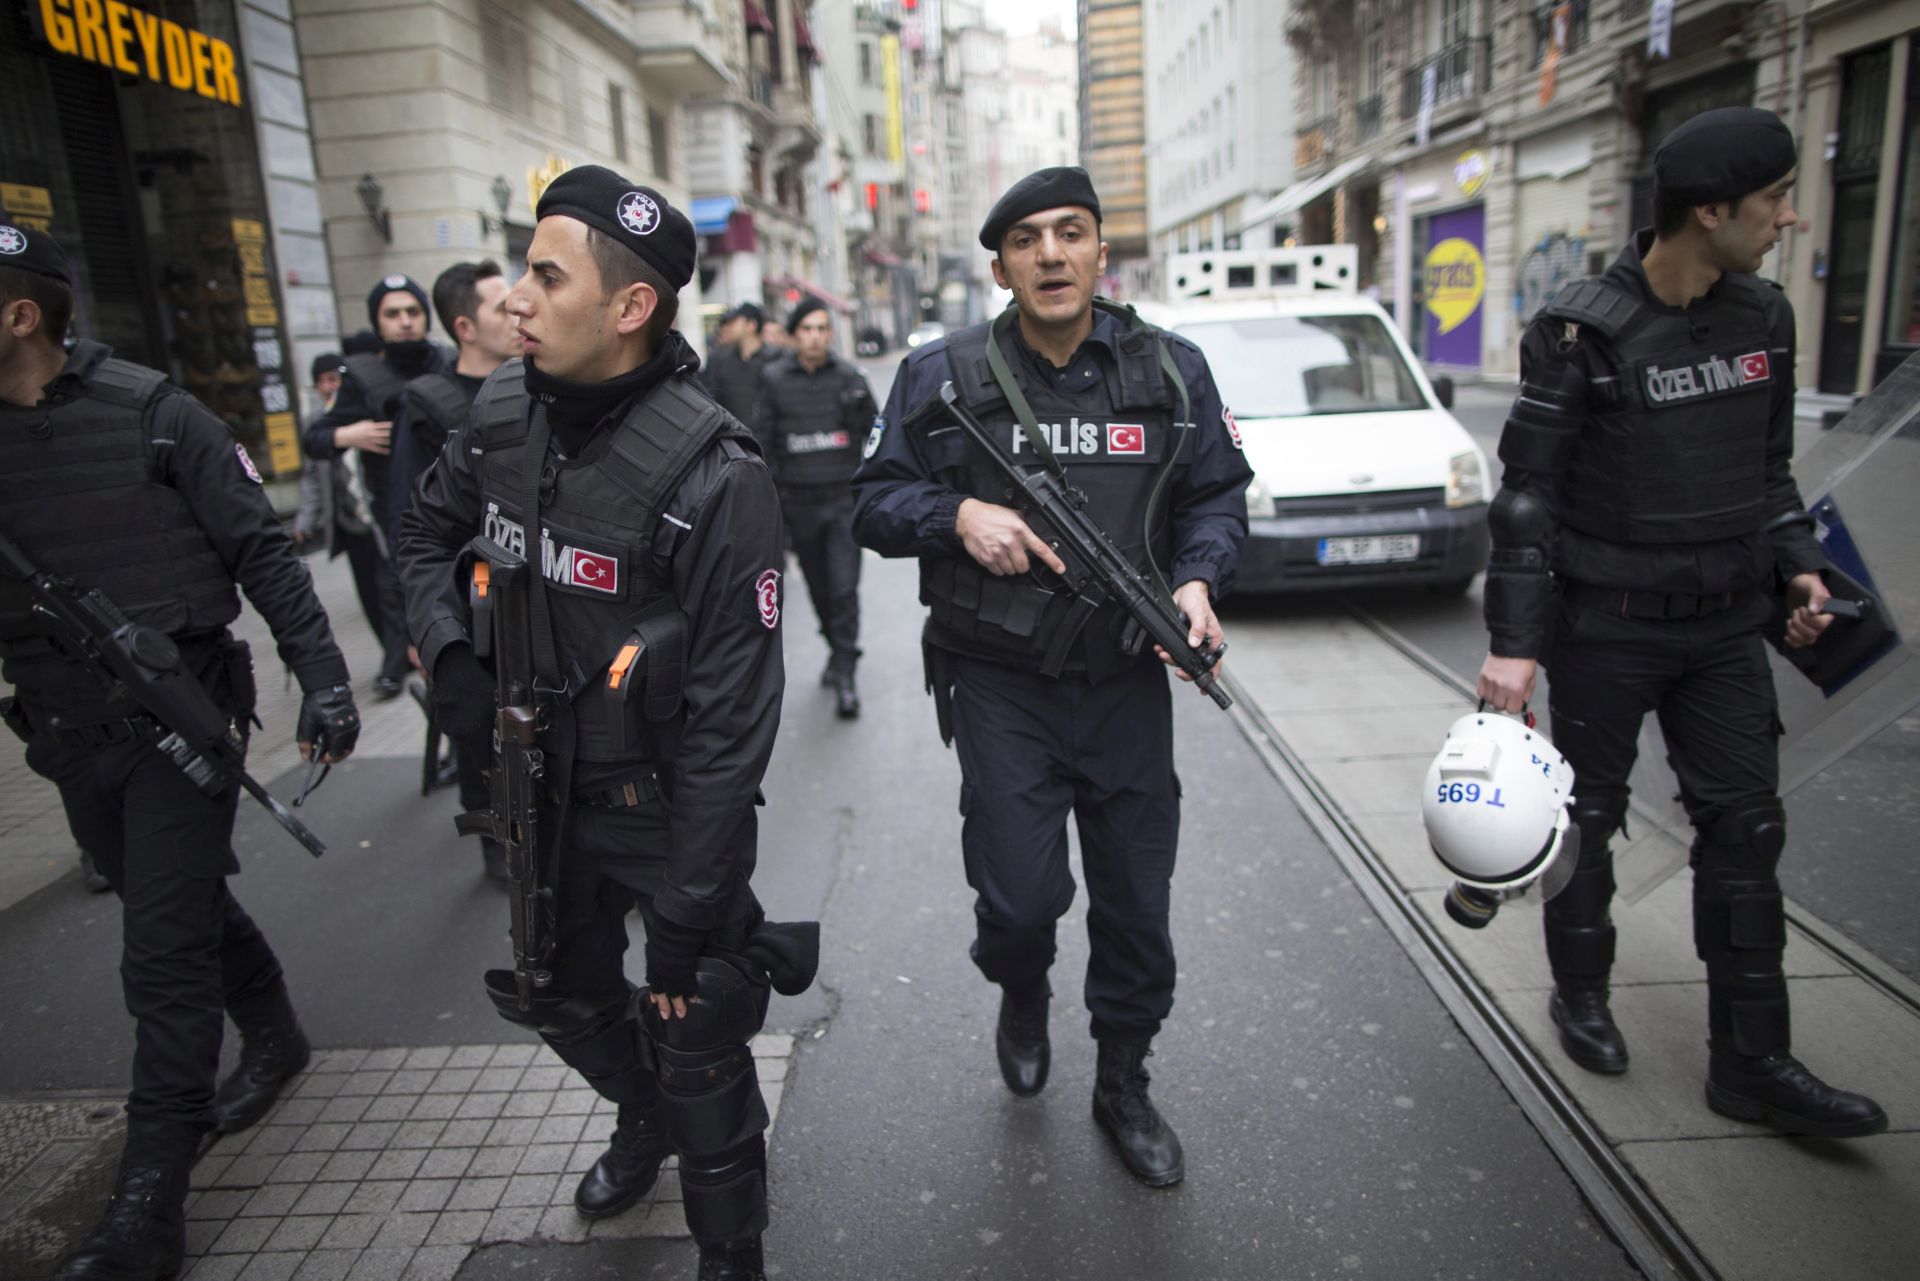 epa05220119 Turkish policemen stand in a cordon off street after a suicide bomb attack at Istiklal Street in Istanbul, Turkey, 19 March 2016. According to media reports, two people have died and seven injured in the suicide bomb in Istiklal Street, a main high street in the centre of Istanbul, just off Taksim Square.  EPA/TOLGA BOZOGLU